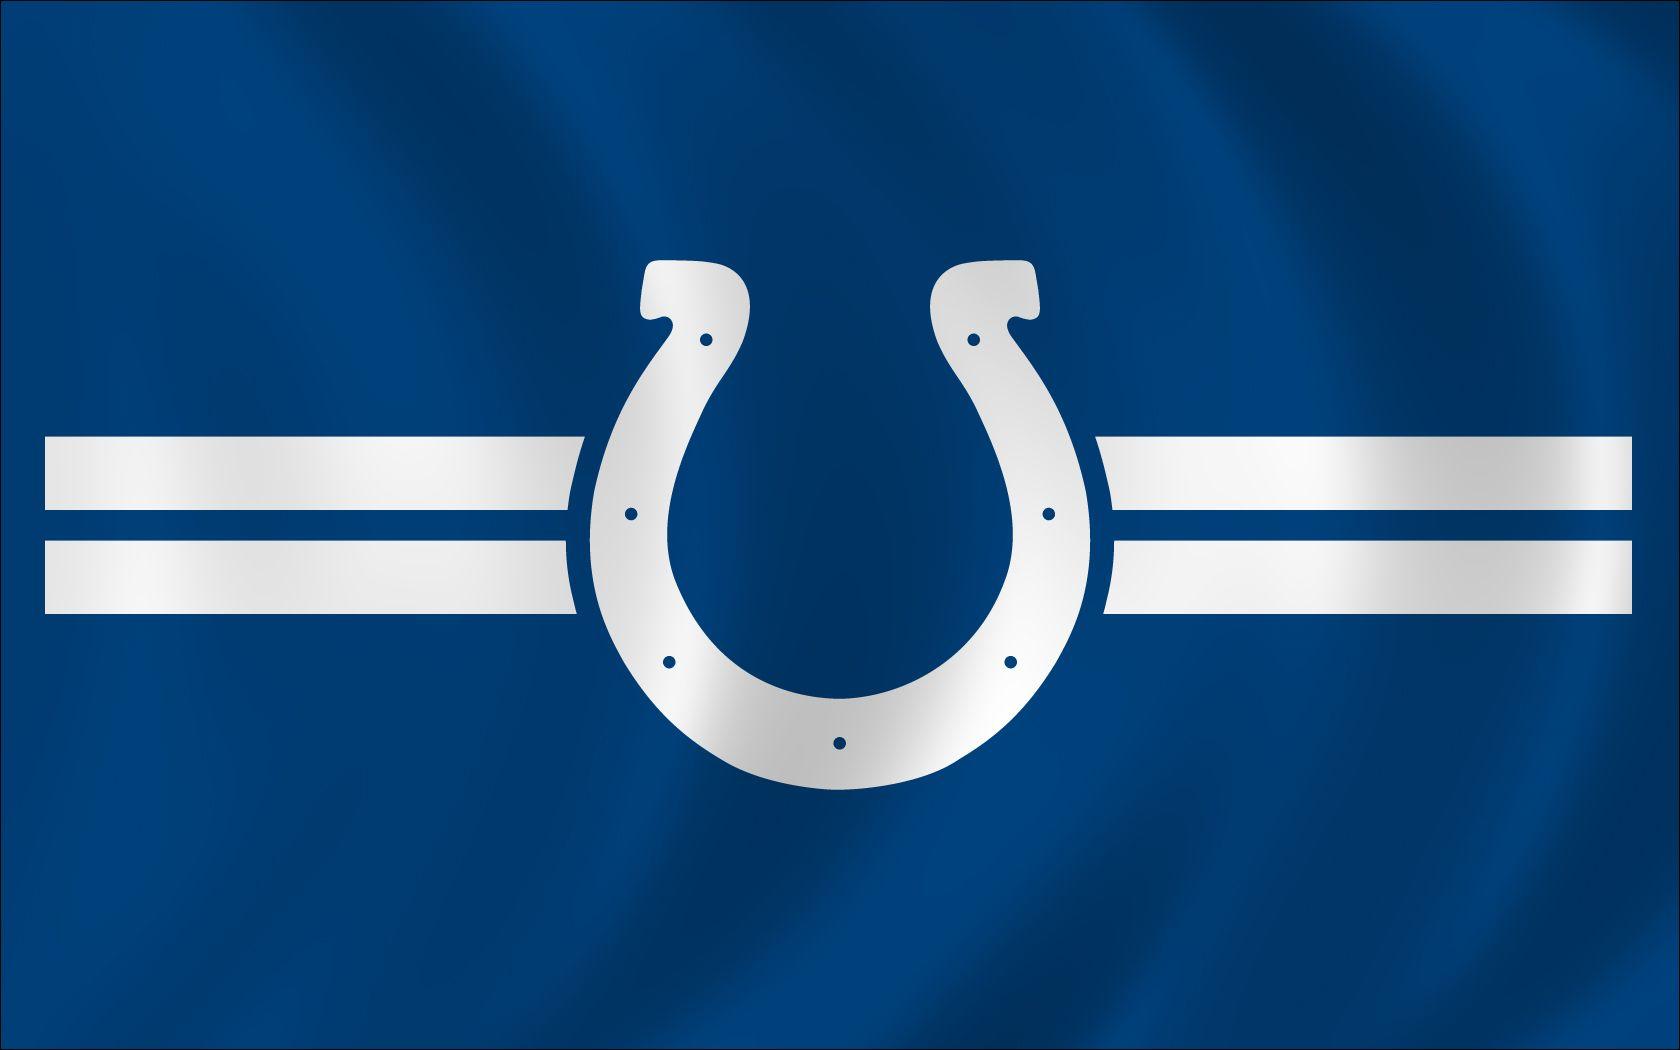 Indianapolis Colts Wallpaper And Background Image